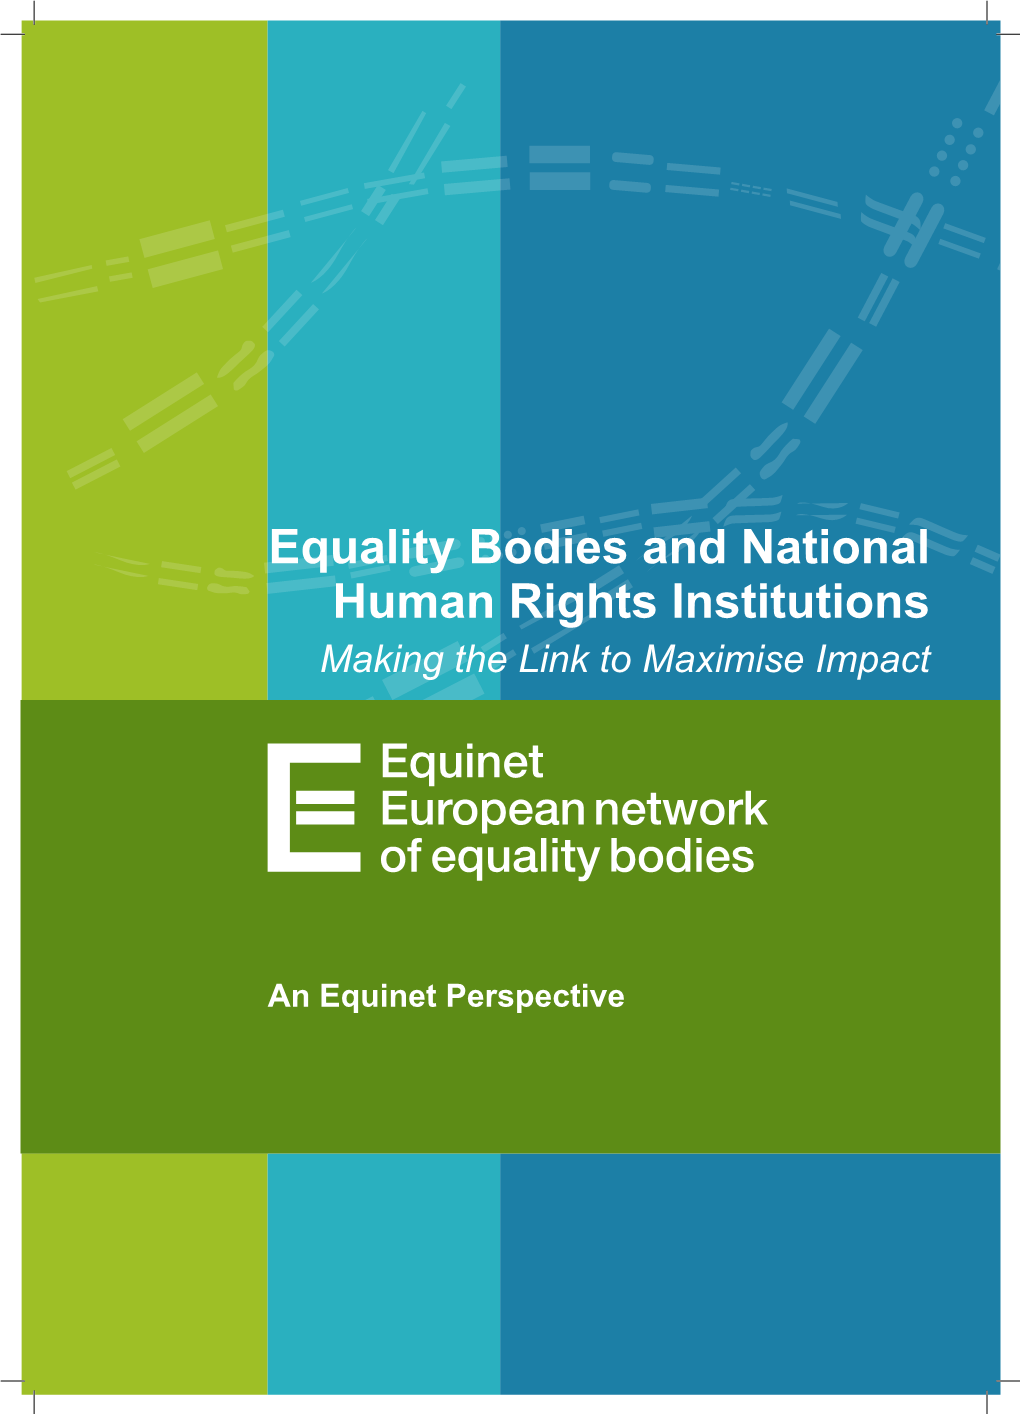 Equality Bodies and National Human Rights Institutions Making the Link to Maximise Impact